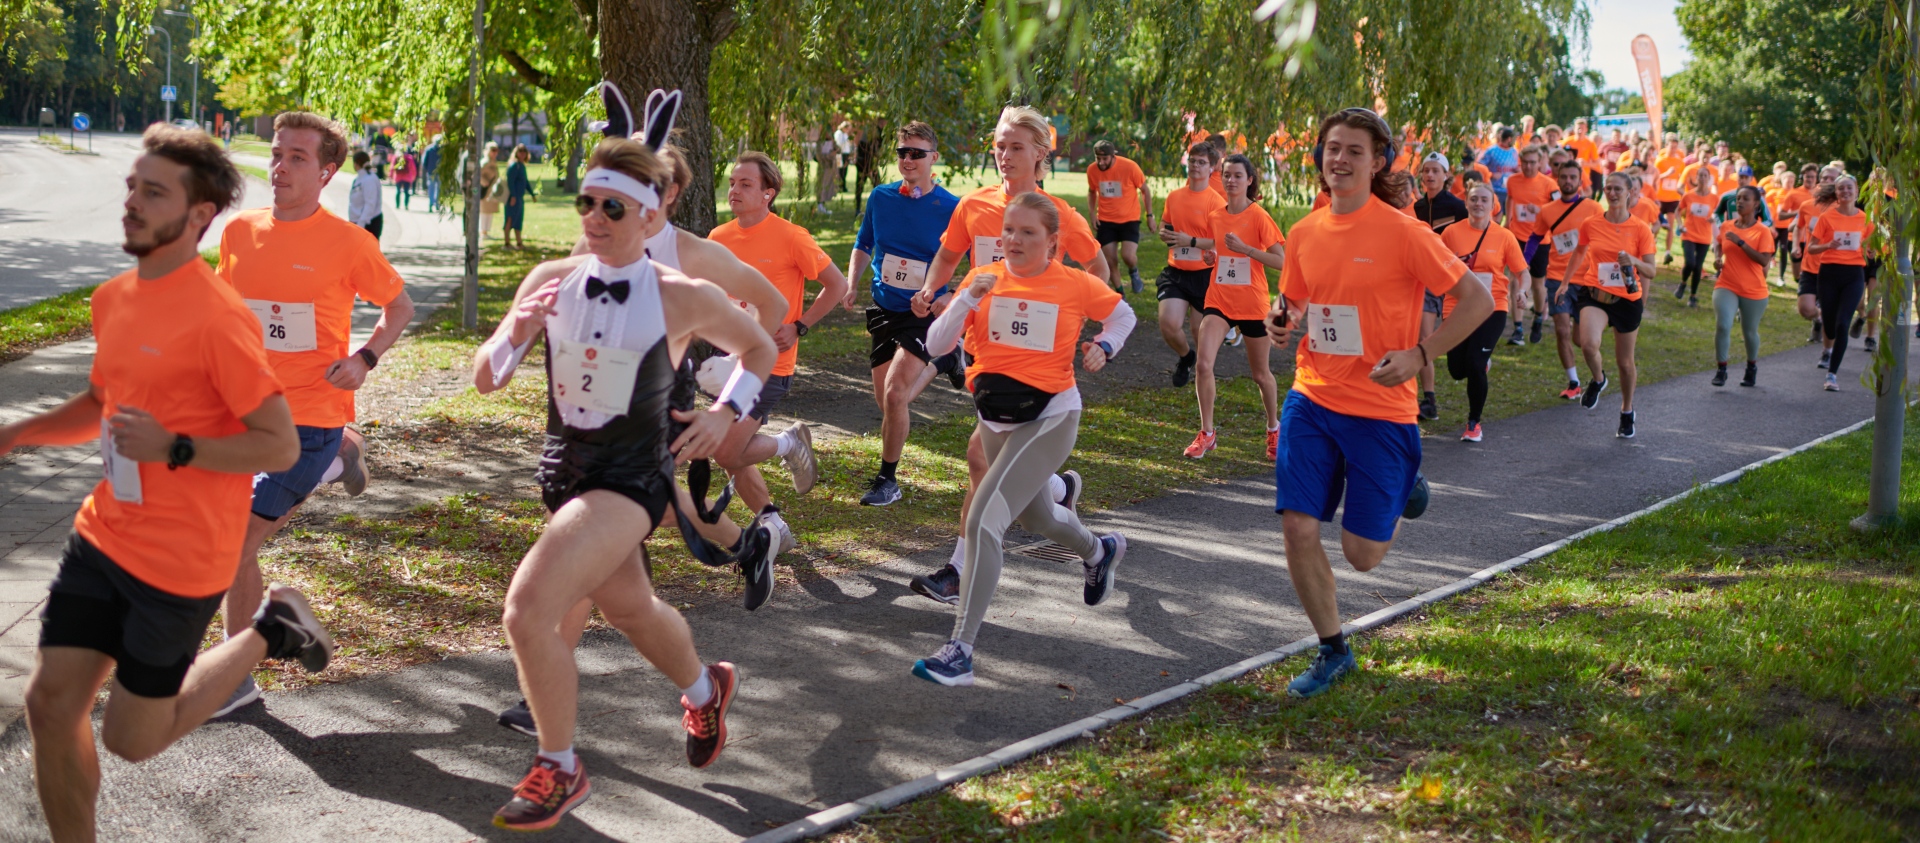 A group of people running in orange t-shirts. Some are dressed up like a bunny